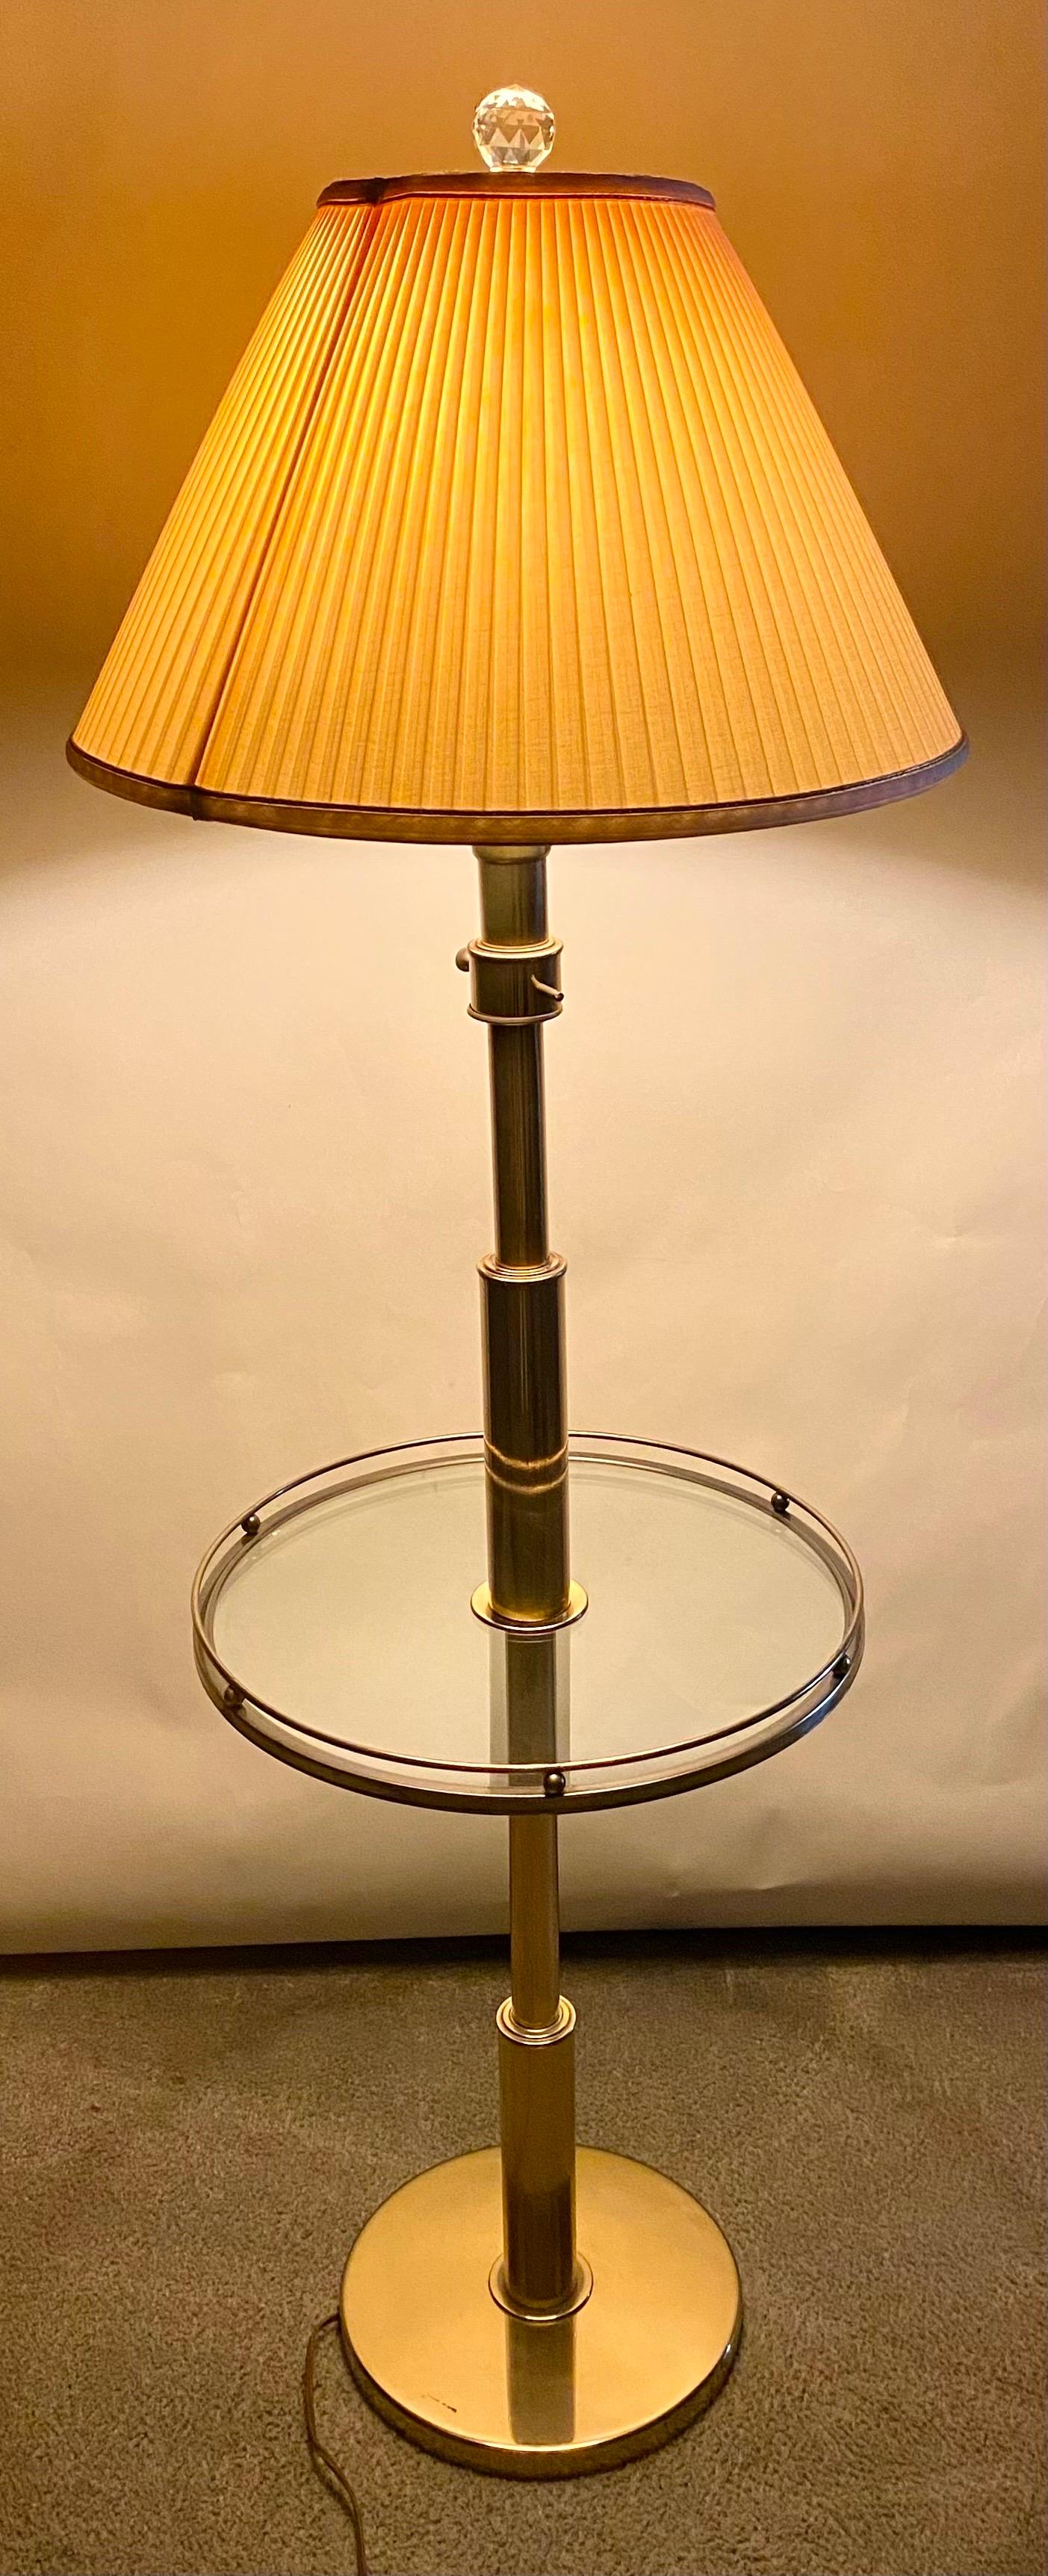 A classic and elegant Mid-Century Modern Table lamp. The table lamp is finely made of brass . The table features a round brass base and the table is has a glass top and is nicely framed of brass in a rail design having round brass motifs.  The table